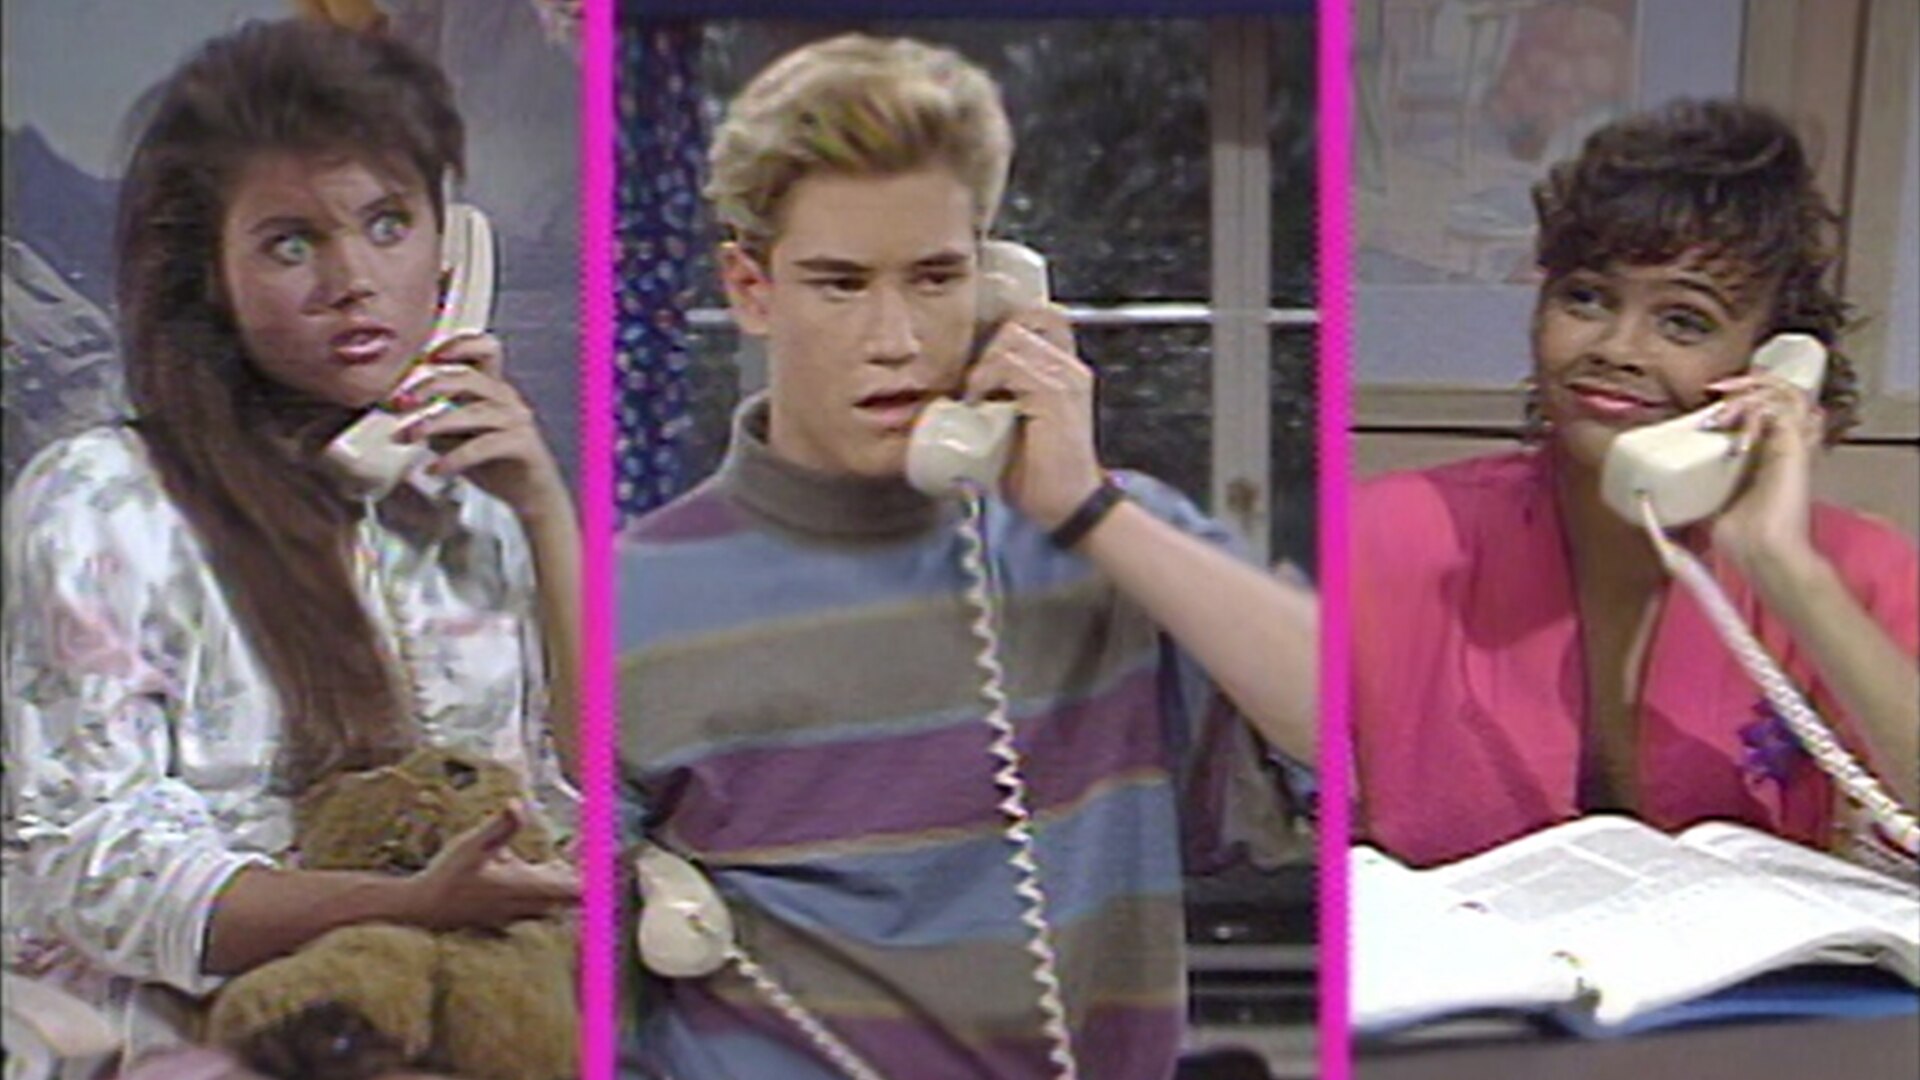 Watch Saved by the Bell Episode: 1-900-Crushed - NBC.com